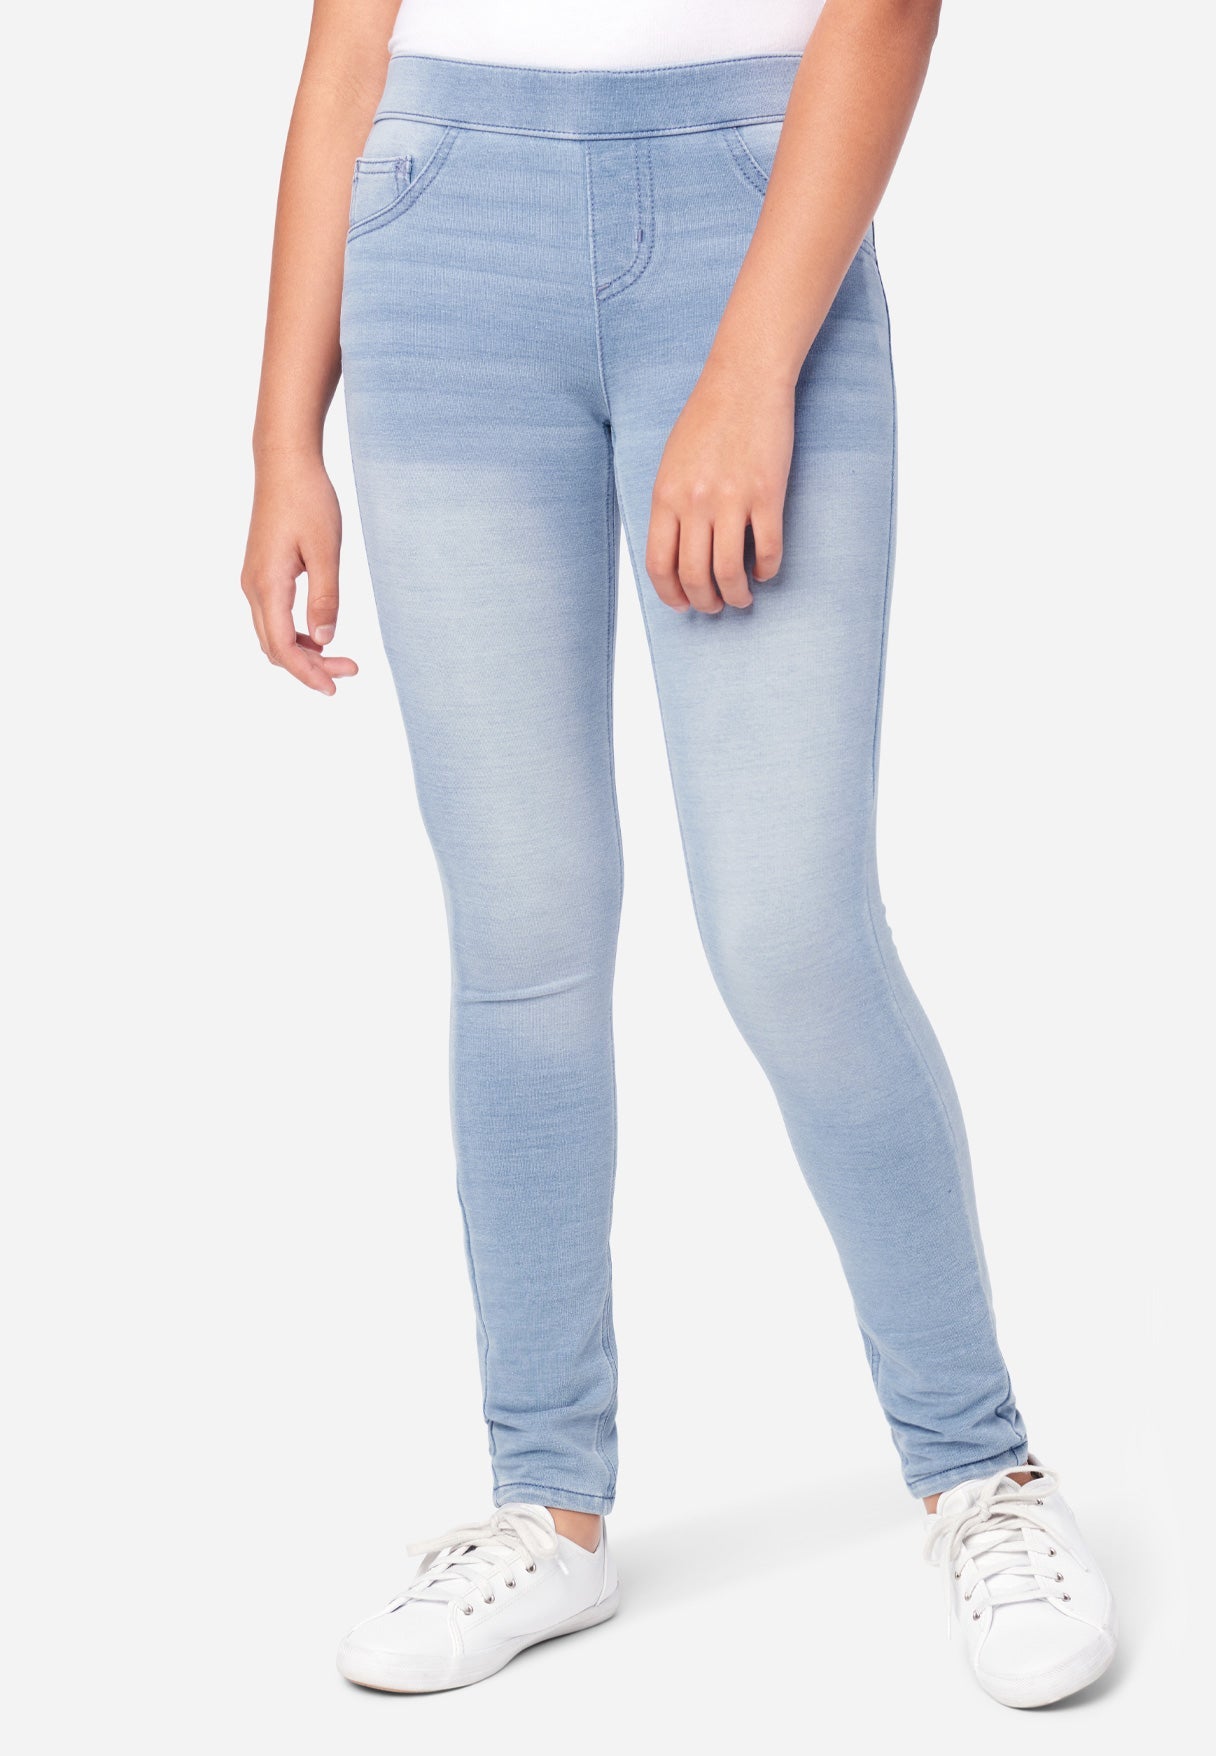 Justice Girl's Pull-On Jean Leggings in Light Wash, Size 6